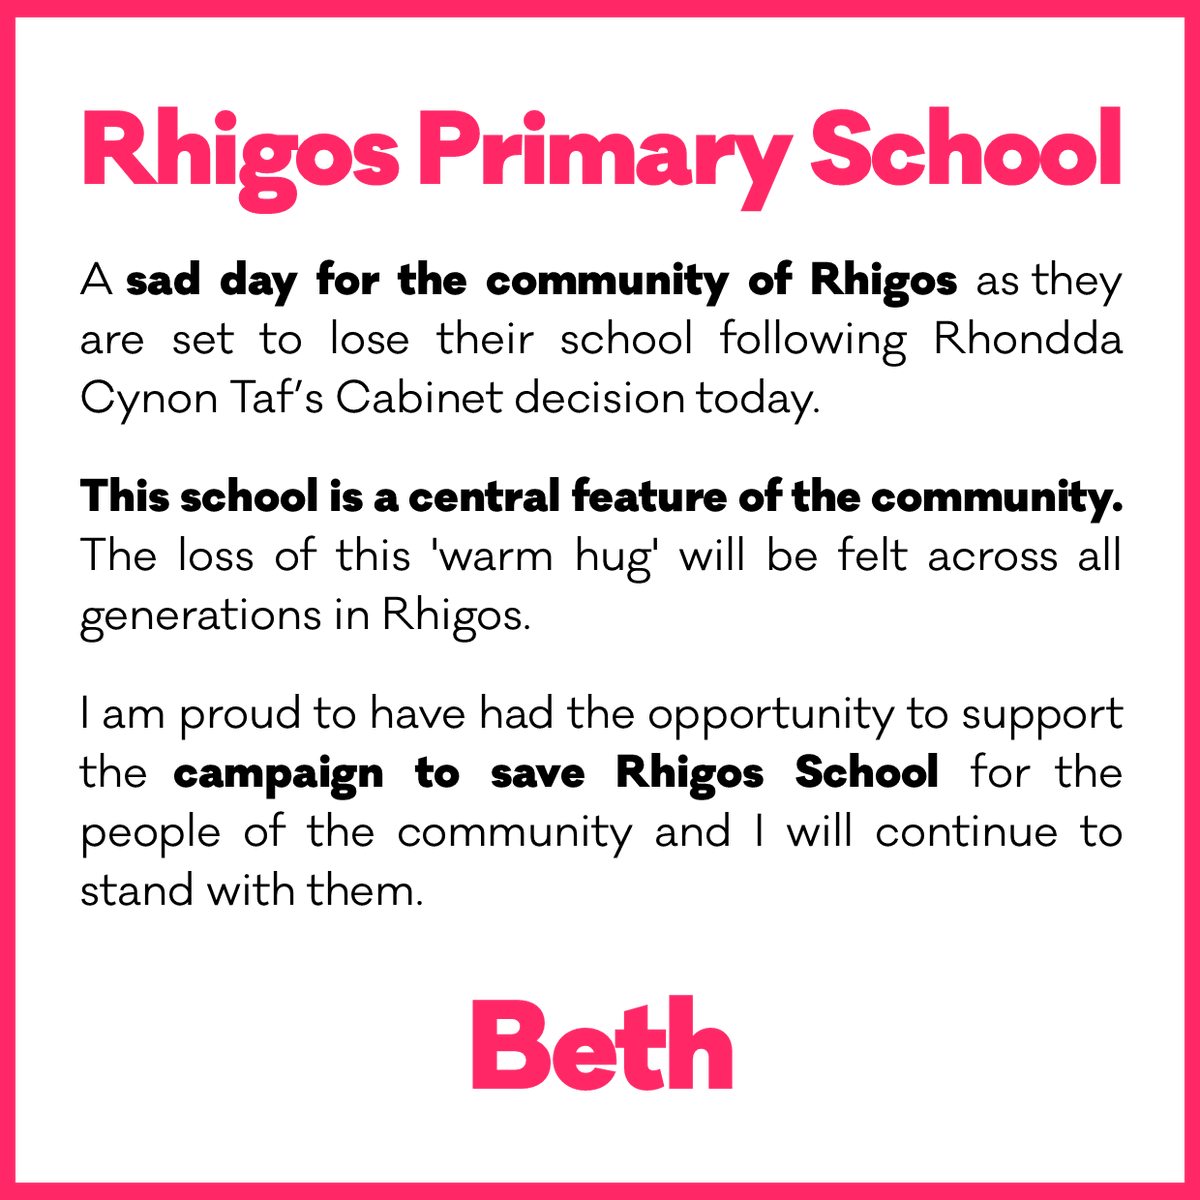 A sad day for the community of Rhigos as they are set to lose their school following RCT's Cabinet decision today. I am proud to have had the opportunity to support the campaign to save Rhigos school for the people of the community and I will continue to stand with them.